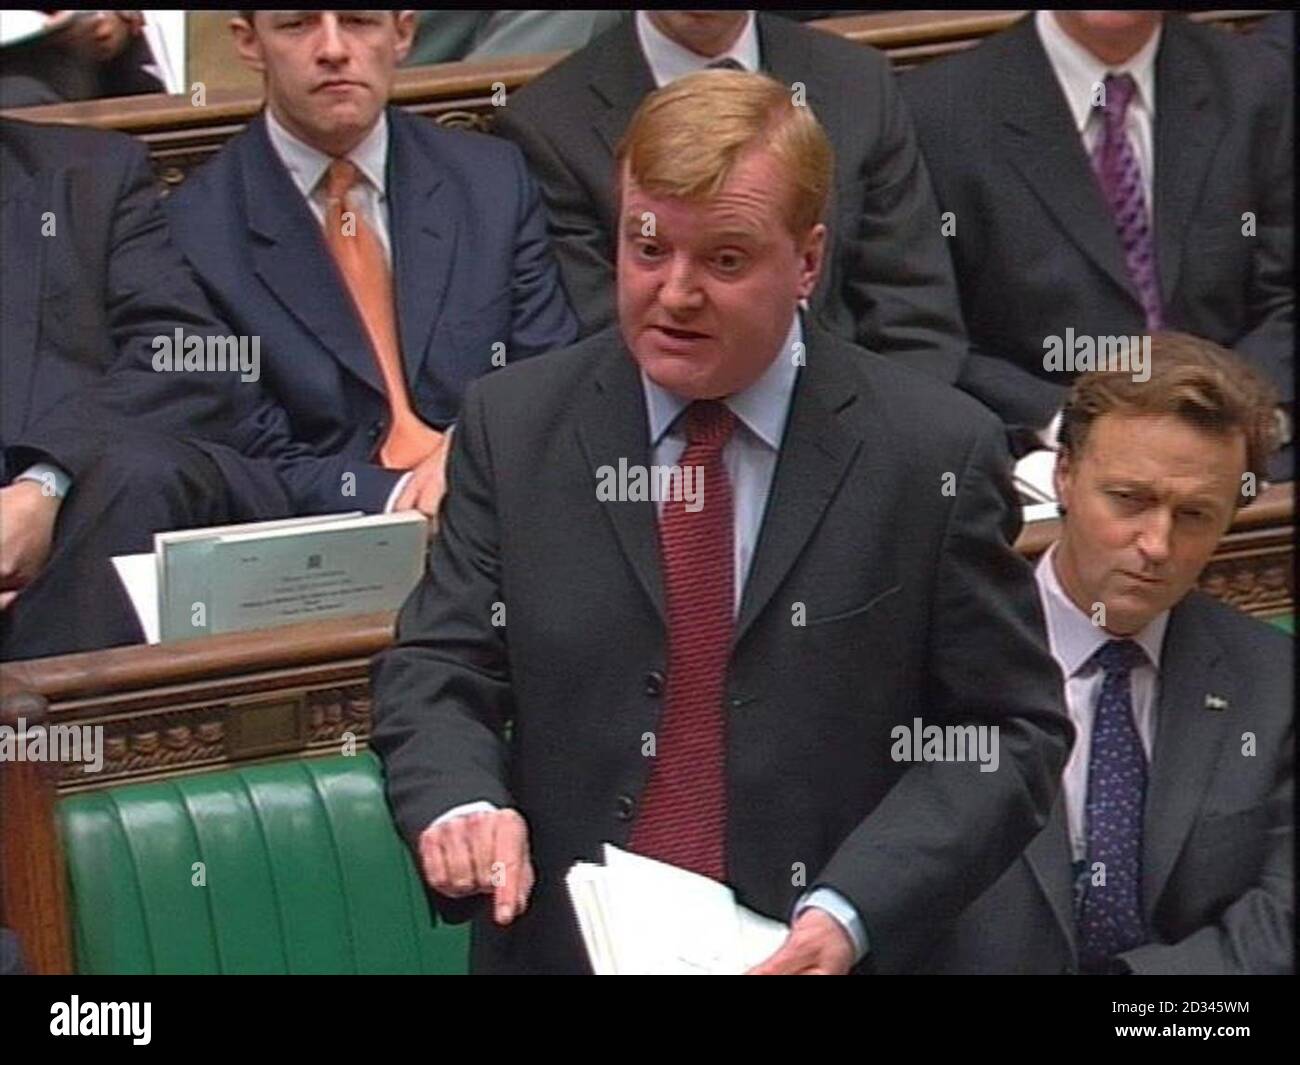 Screen grab of Liberal Democrat leader Charles Kennedy during Prime Minister's Questions at the House of Commons, London. Stock Photo